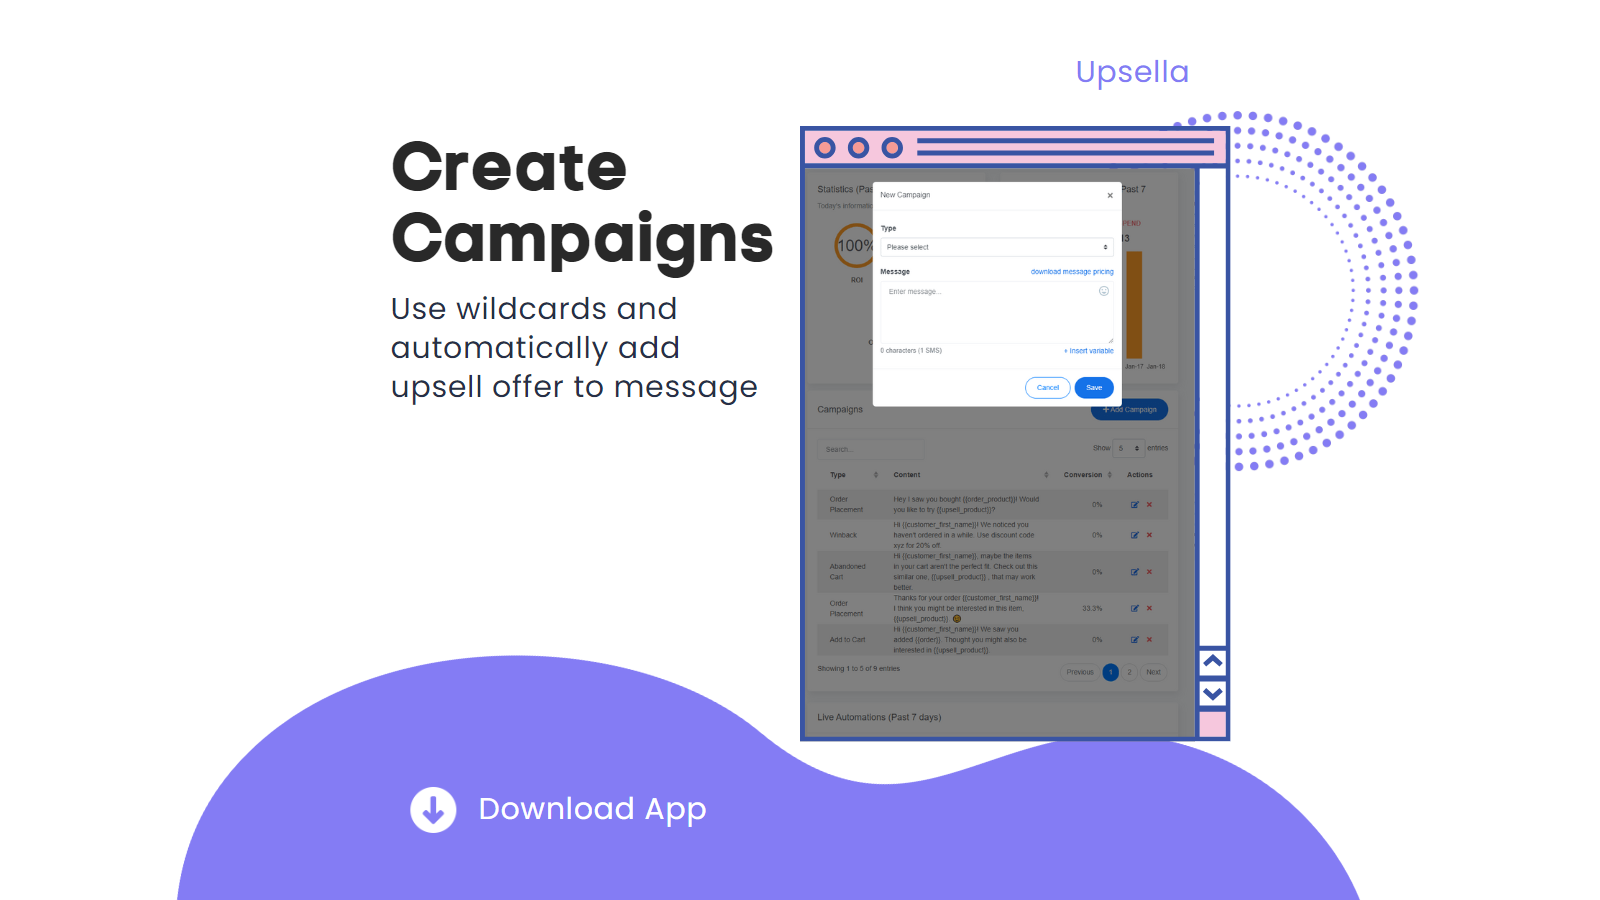 Create campaigns - use wildcards and add upsell offer to message